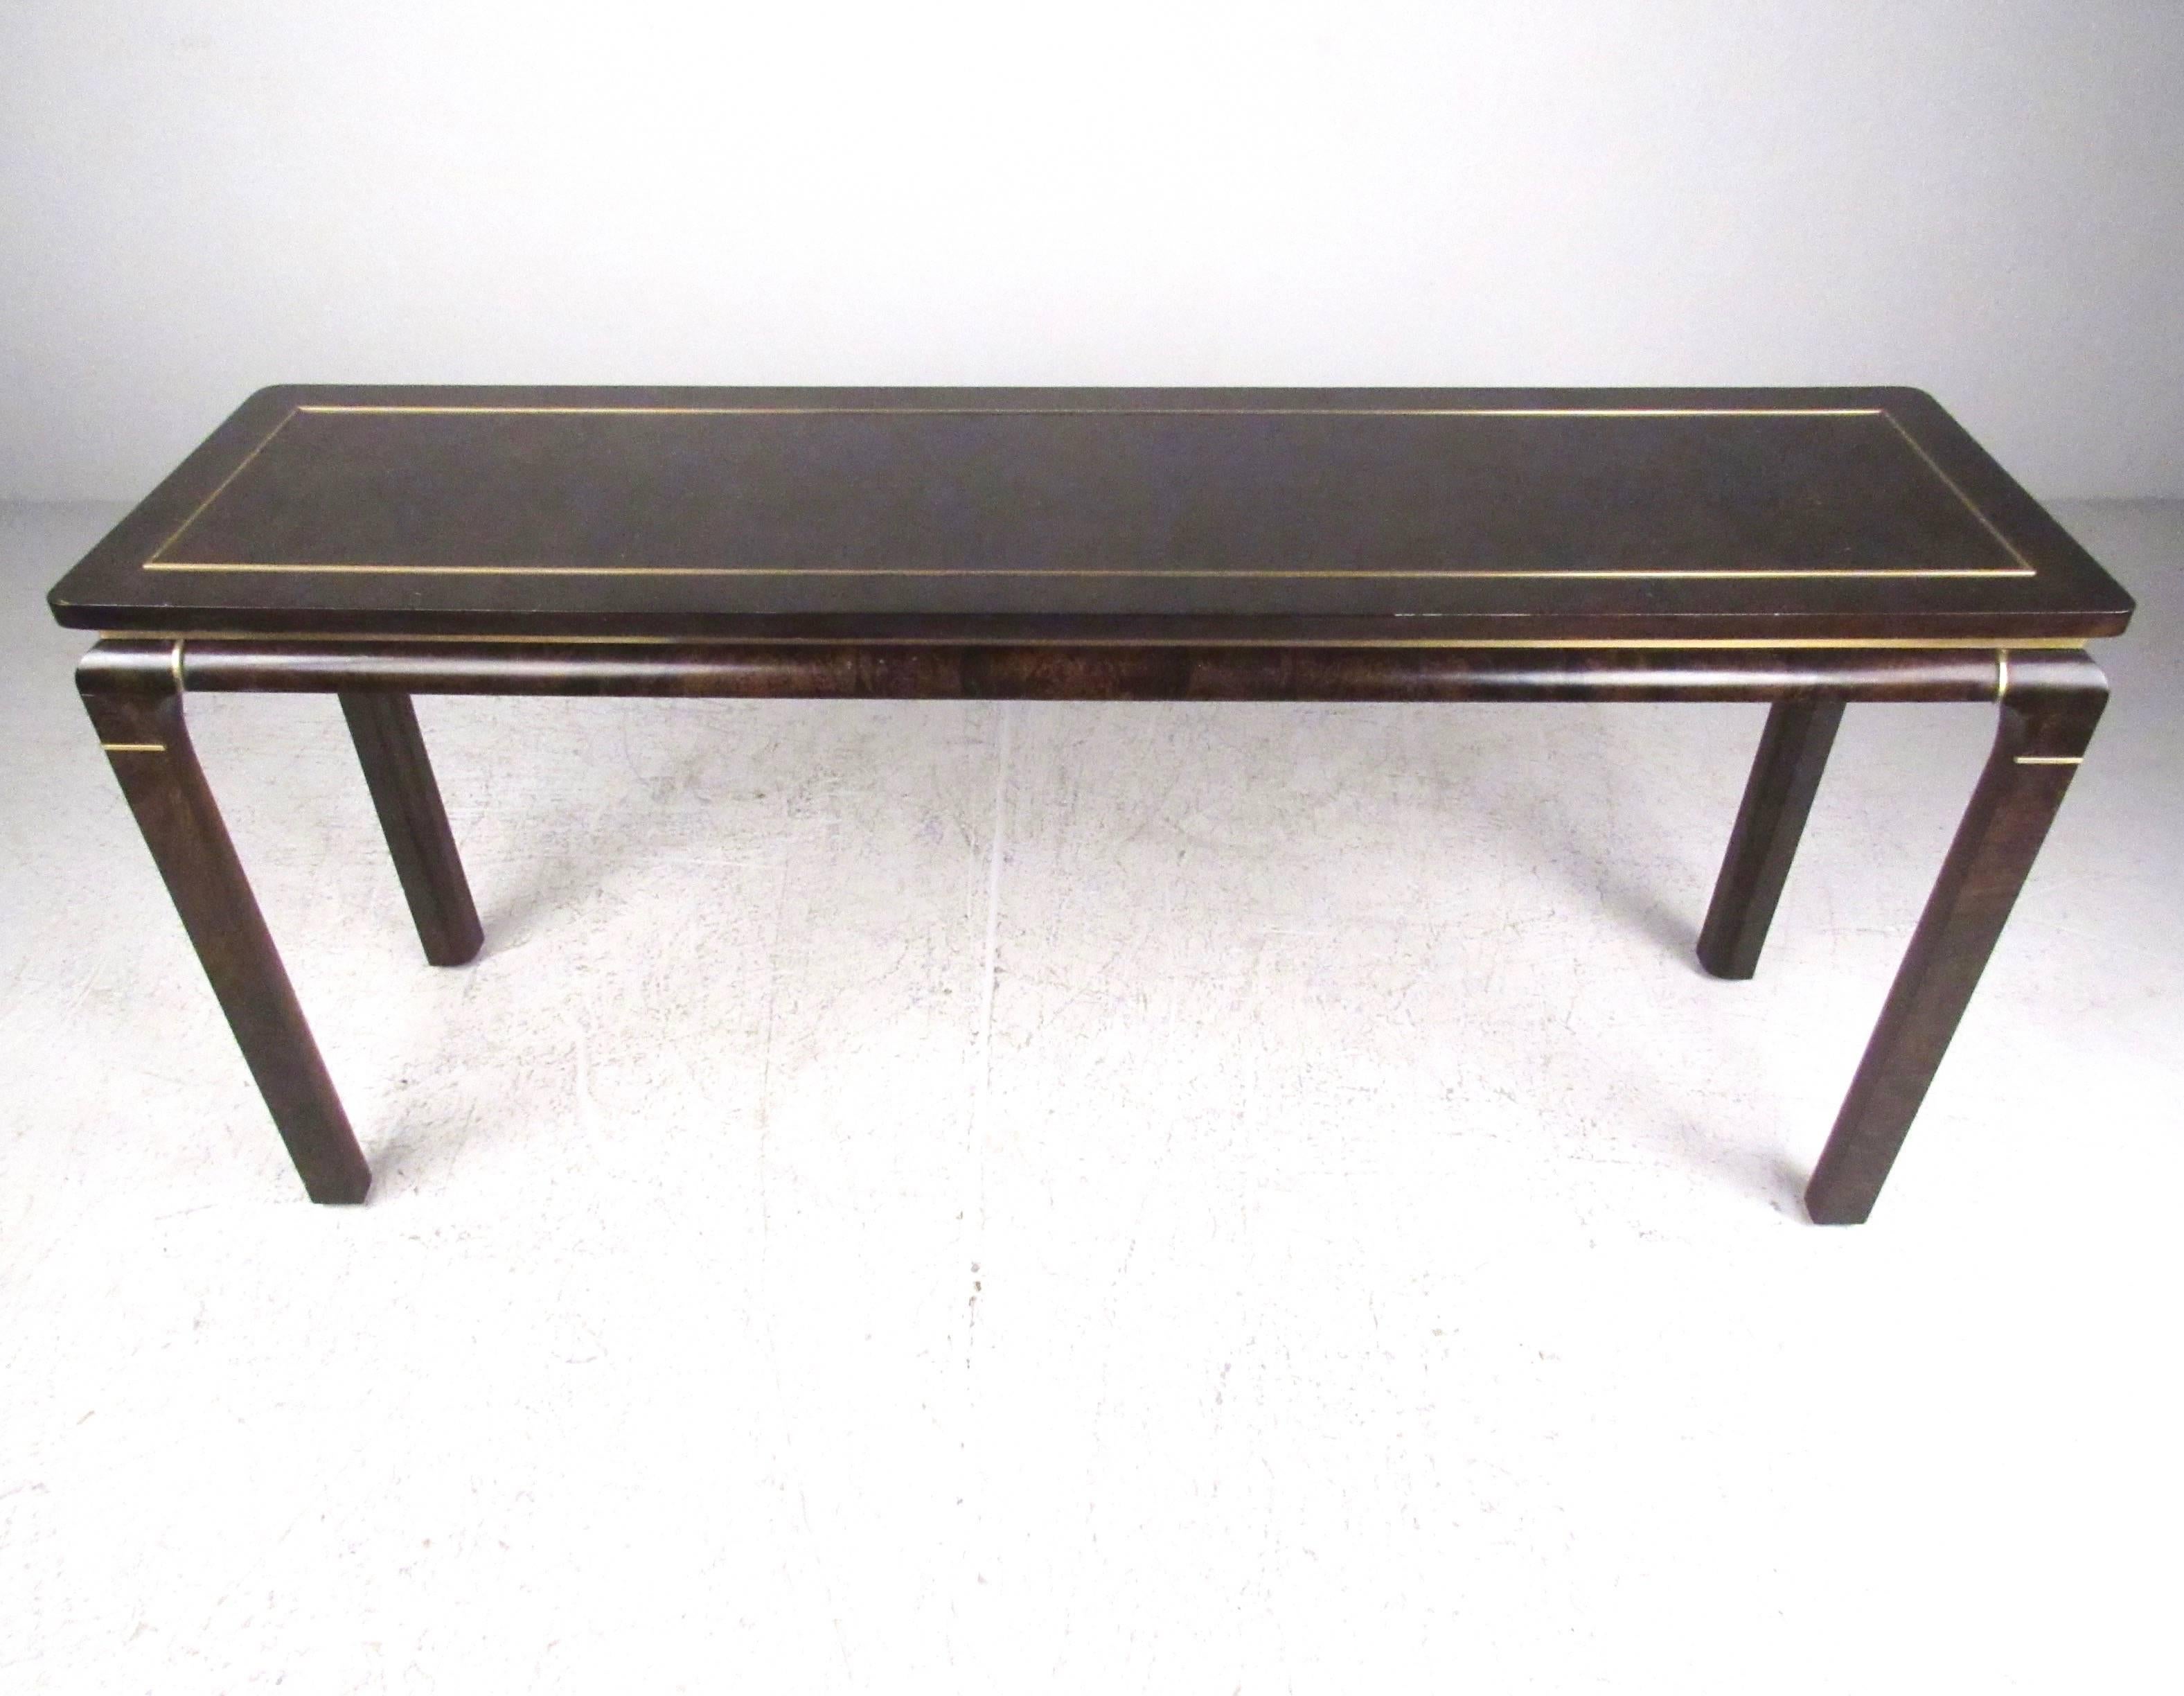 This vintage console table by John Stuart features a stylish Mid-Century design with dark burl lacquered finish and brass trim. Floating style tabletop accentuates the elegant appeal of this table, perfect for sofa or hall use. Please confirm item